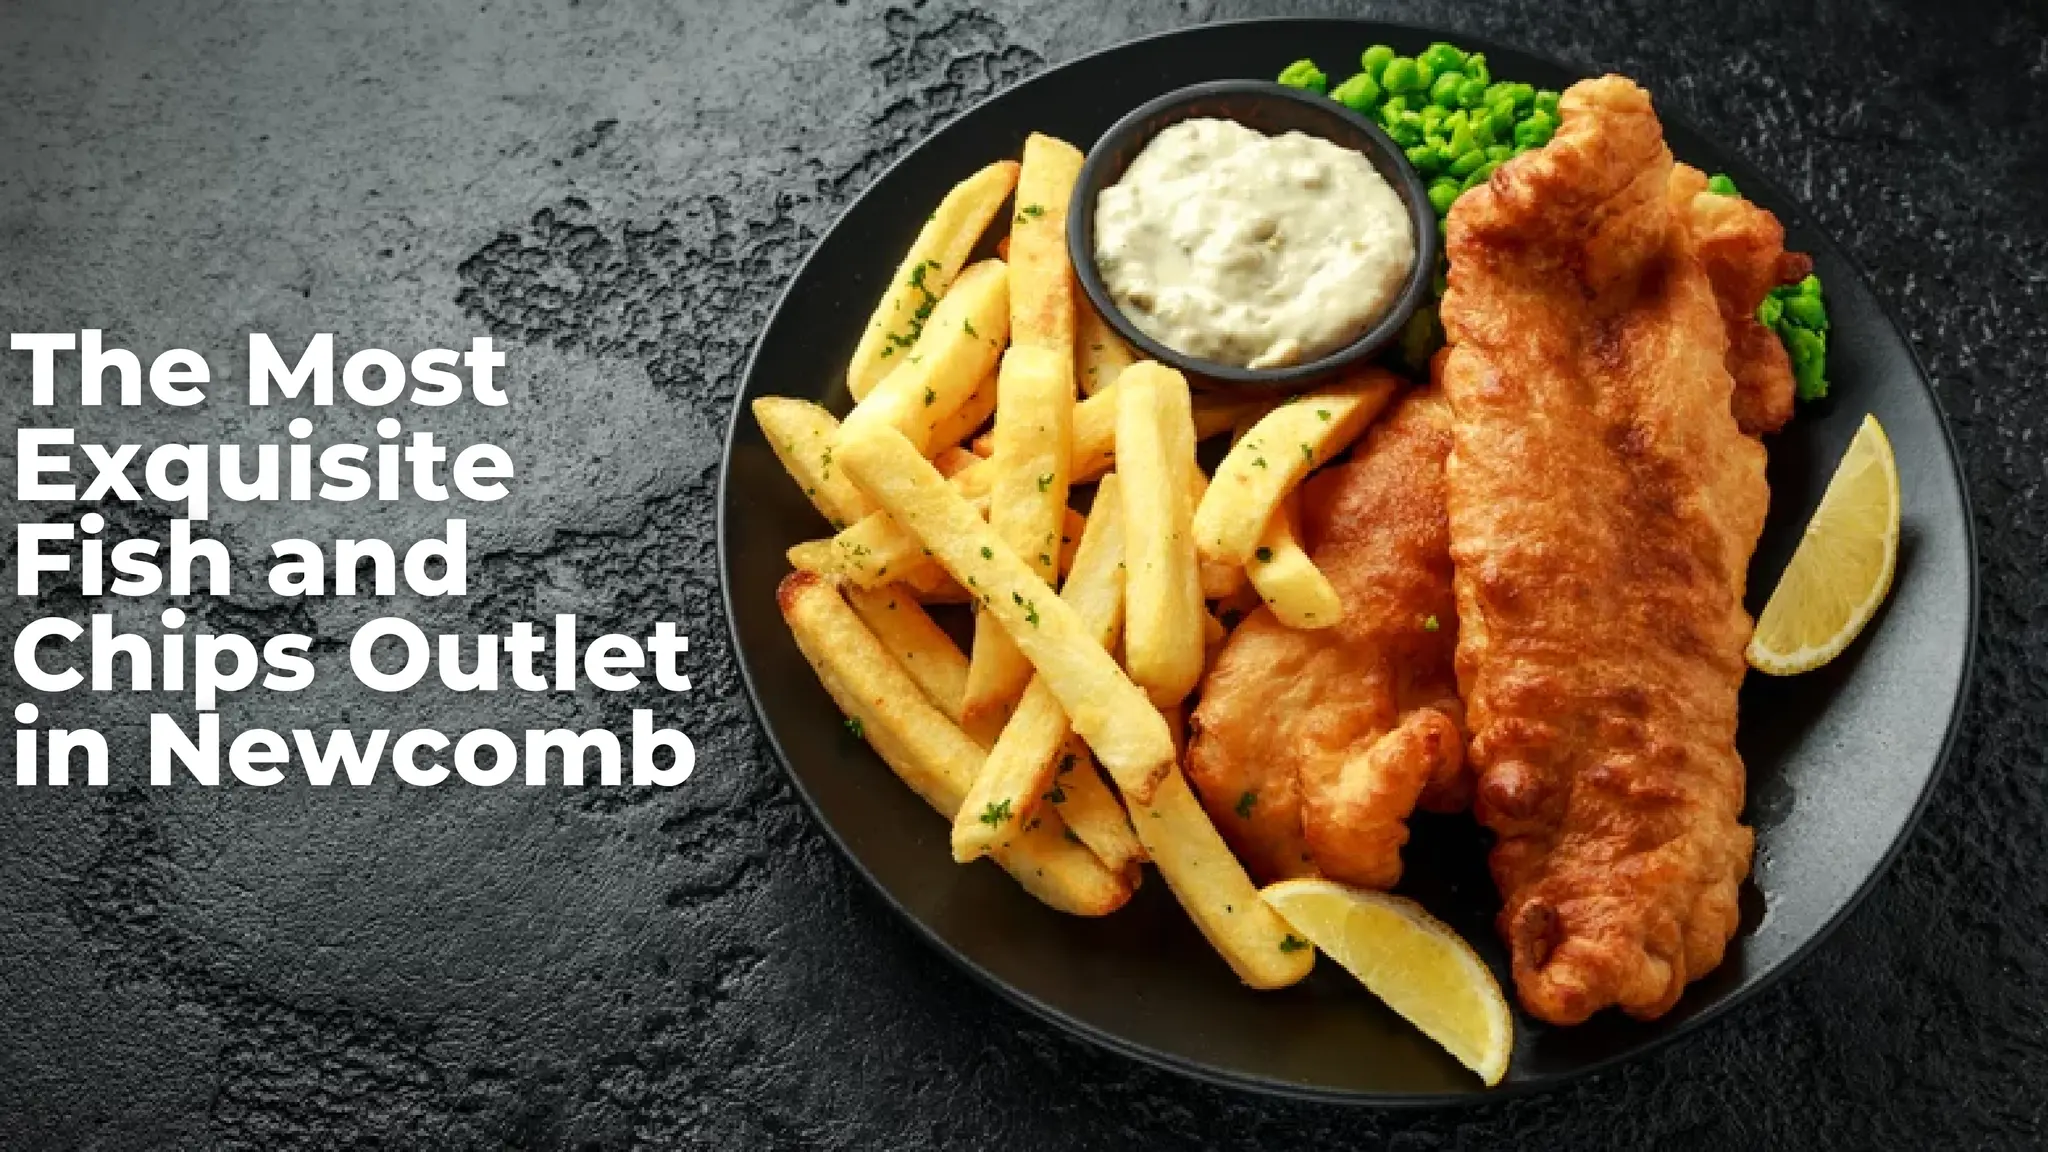 Home To The Best Gluten-Free Fish and Chips in Newcomb and Whittington